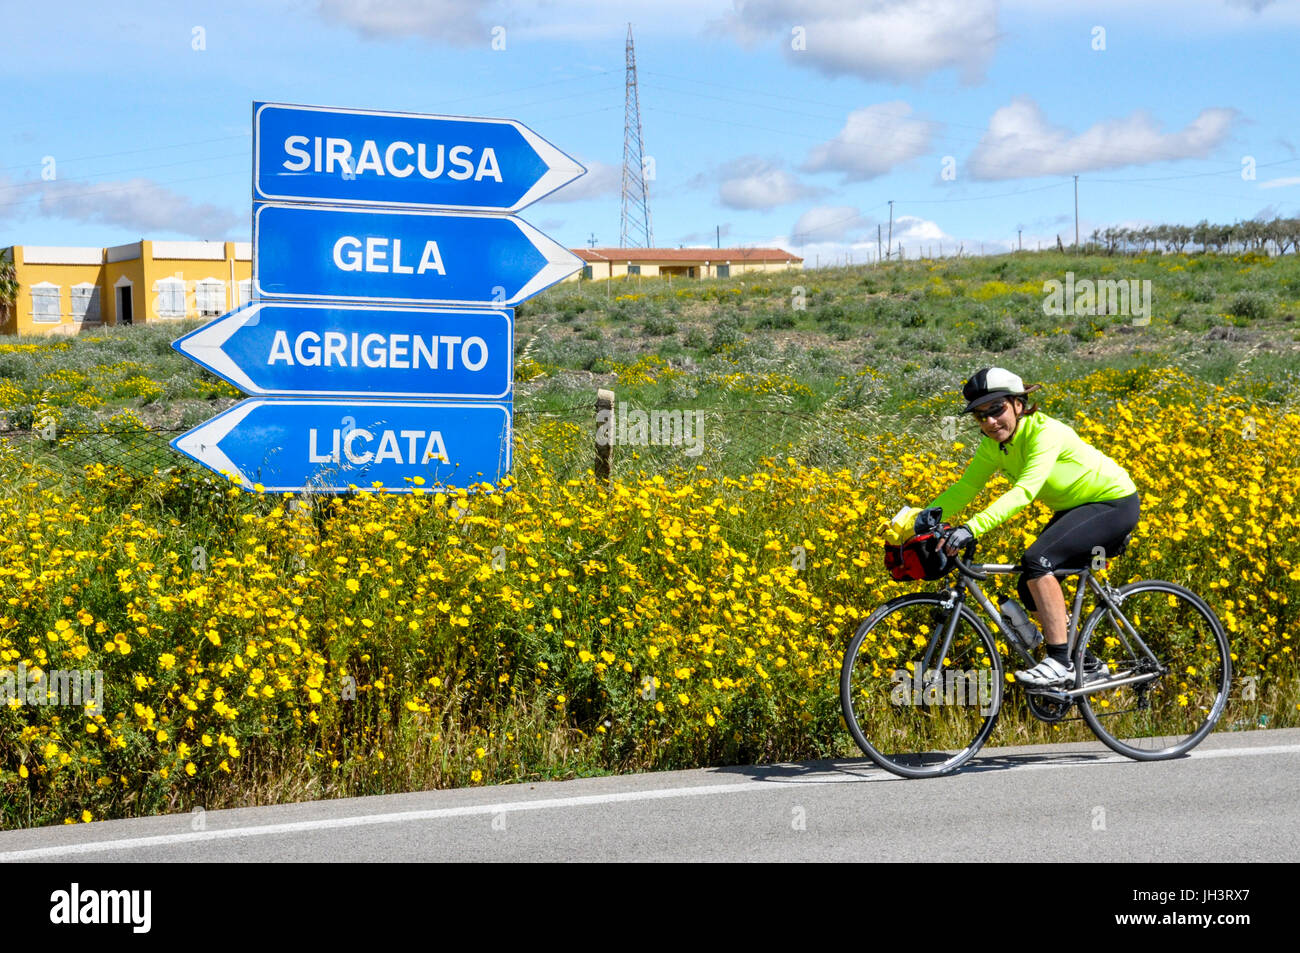 A female touring cyclist  riding on a country road passing a signpost in Sicily, Italy. Stock Photo